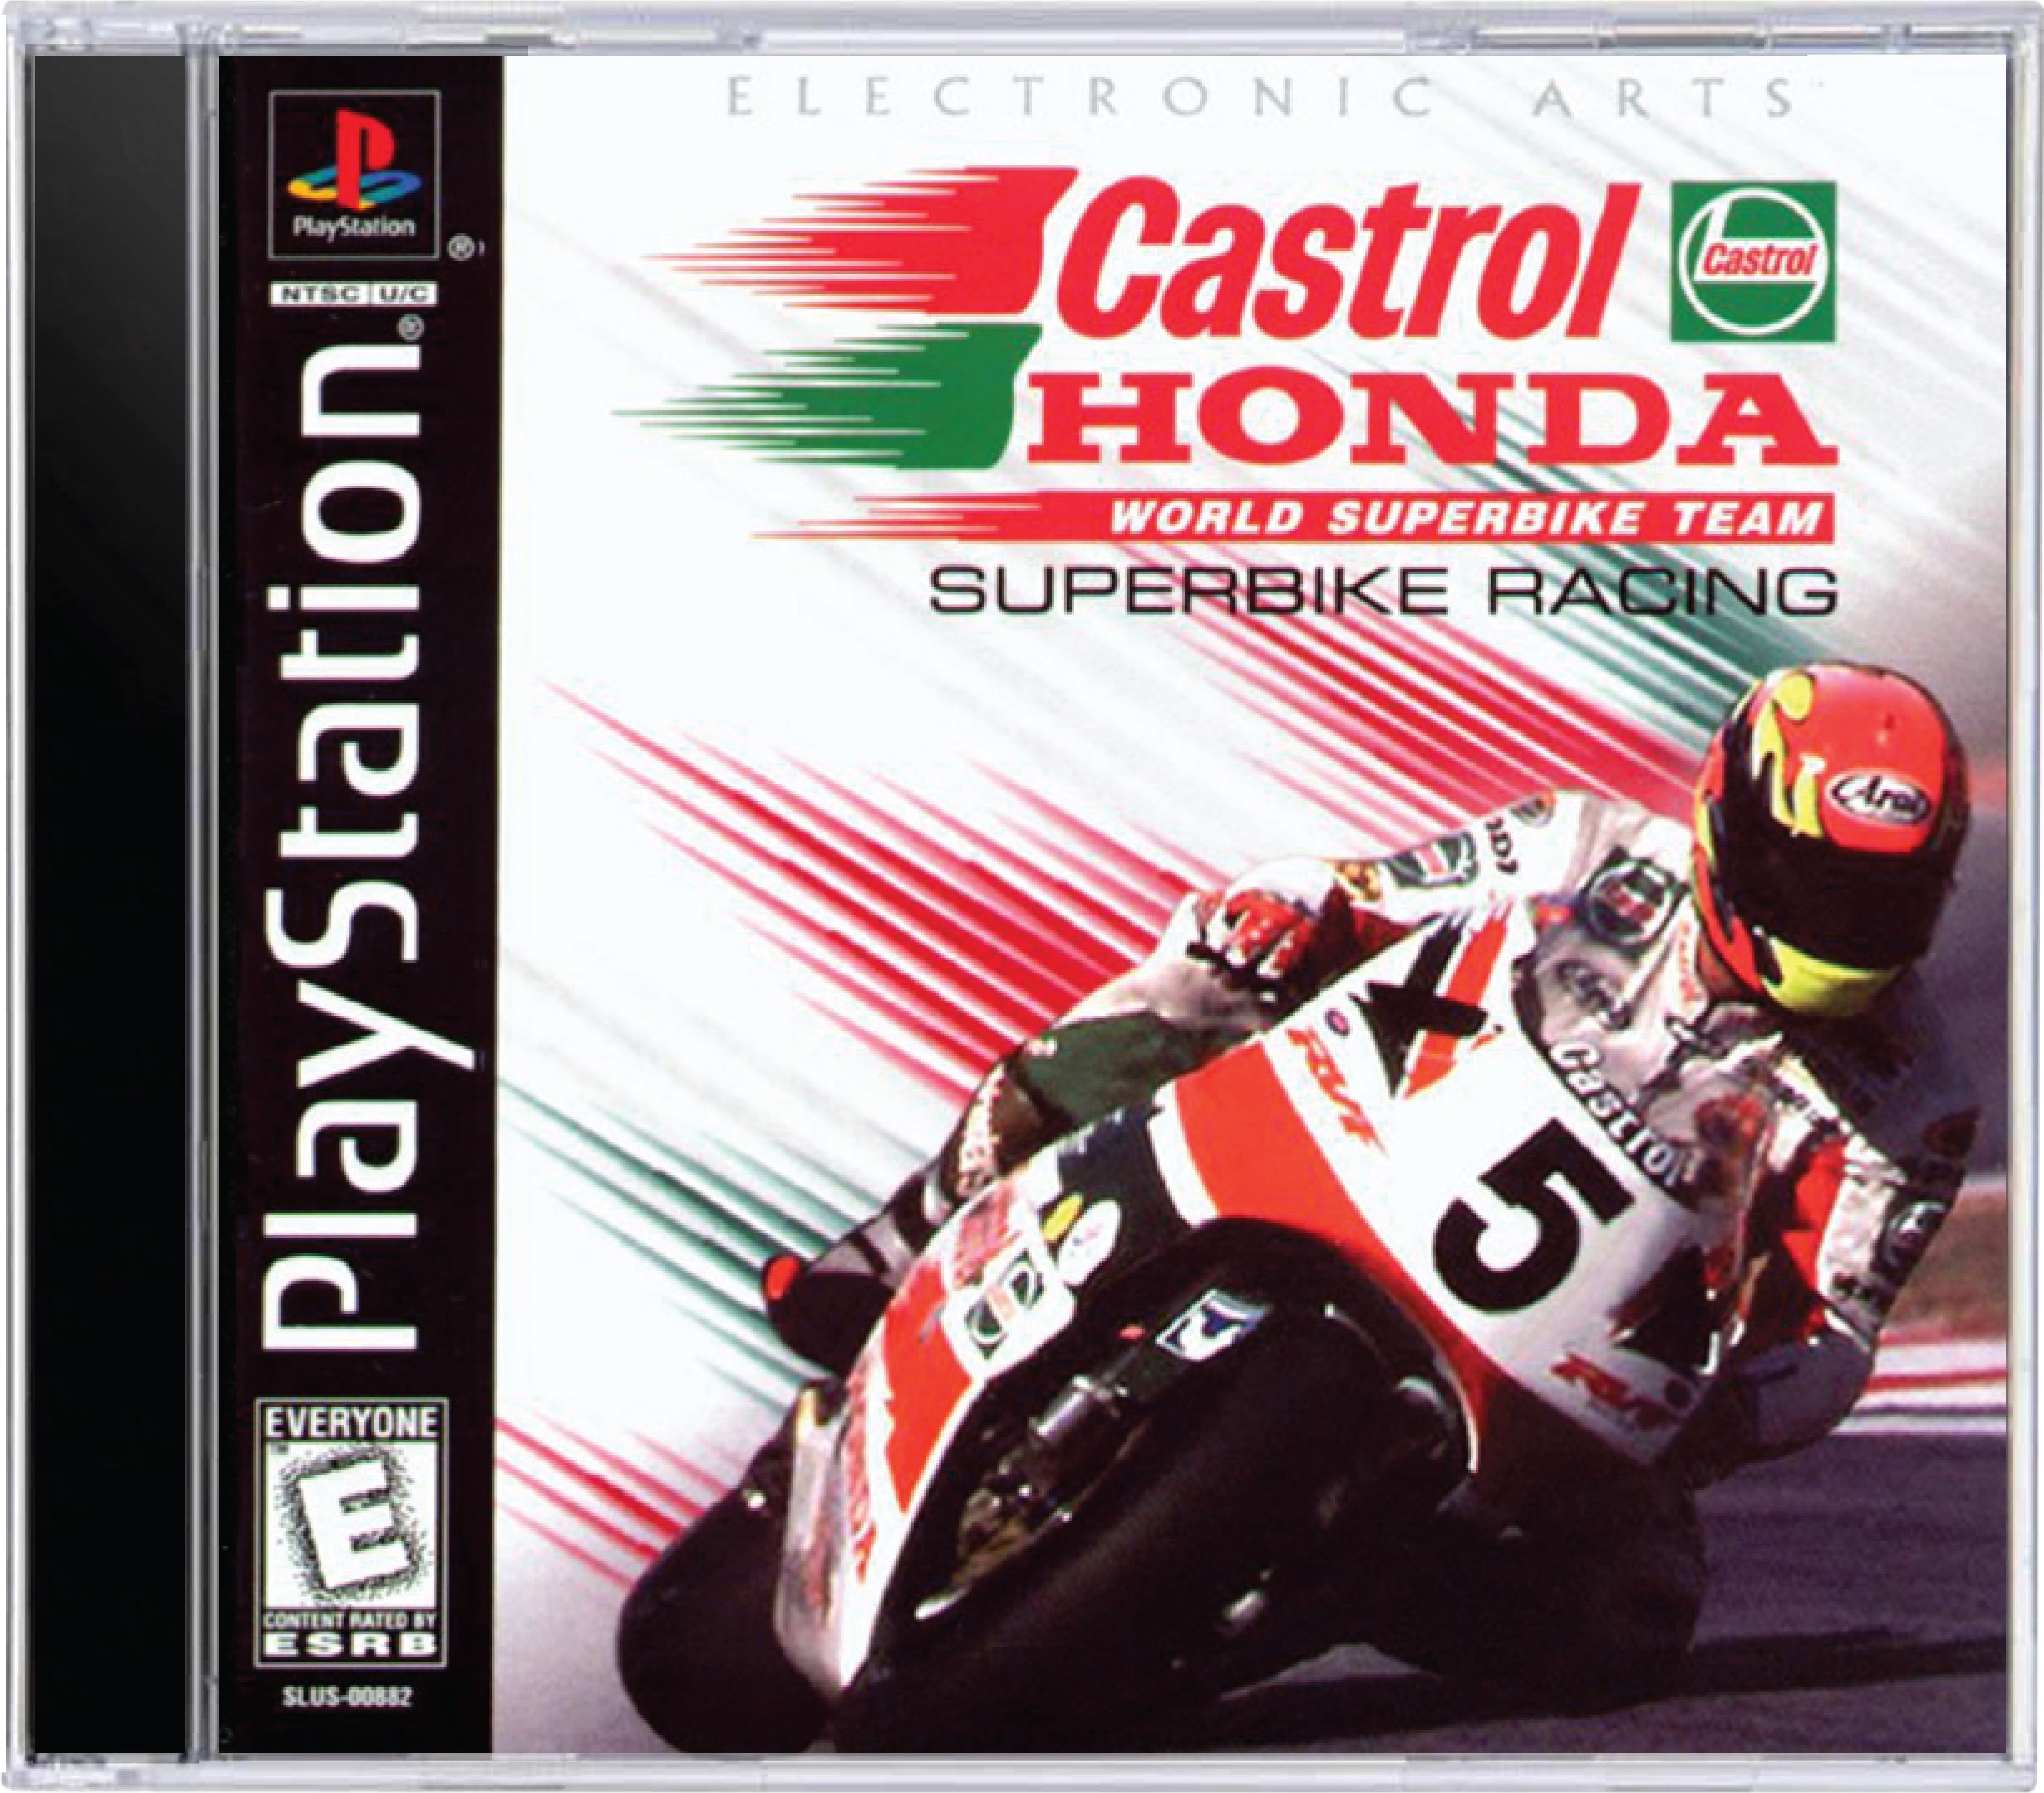 Castrol Honda Superbike Racing Cover Art and Product Photo